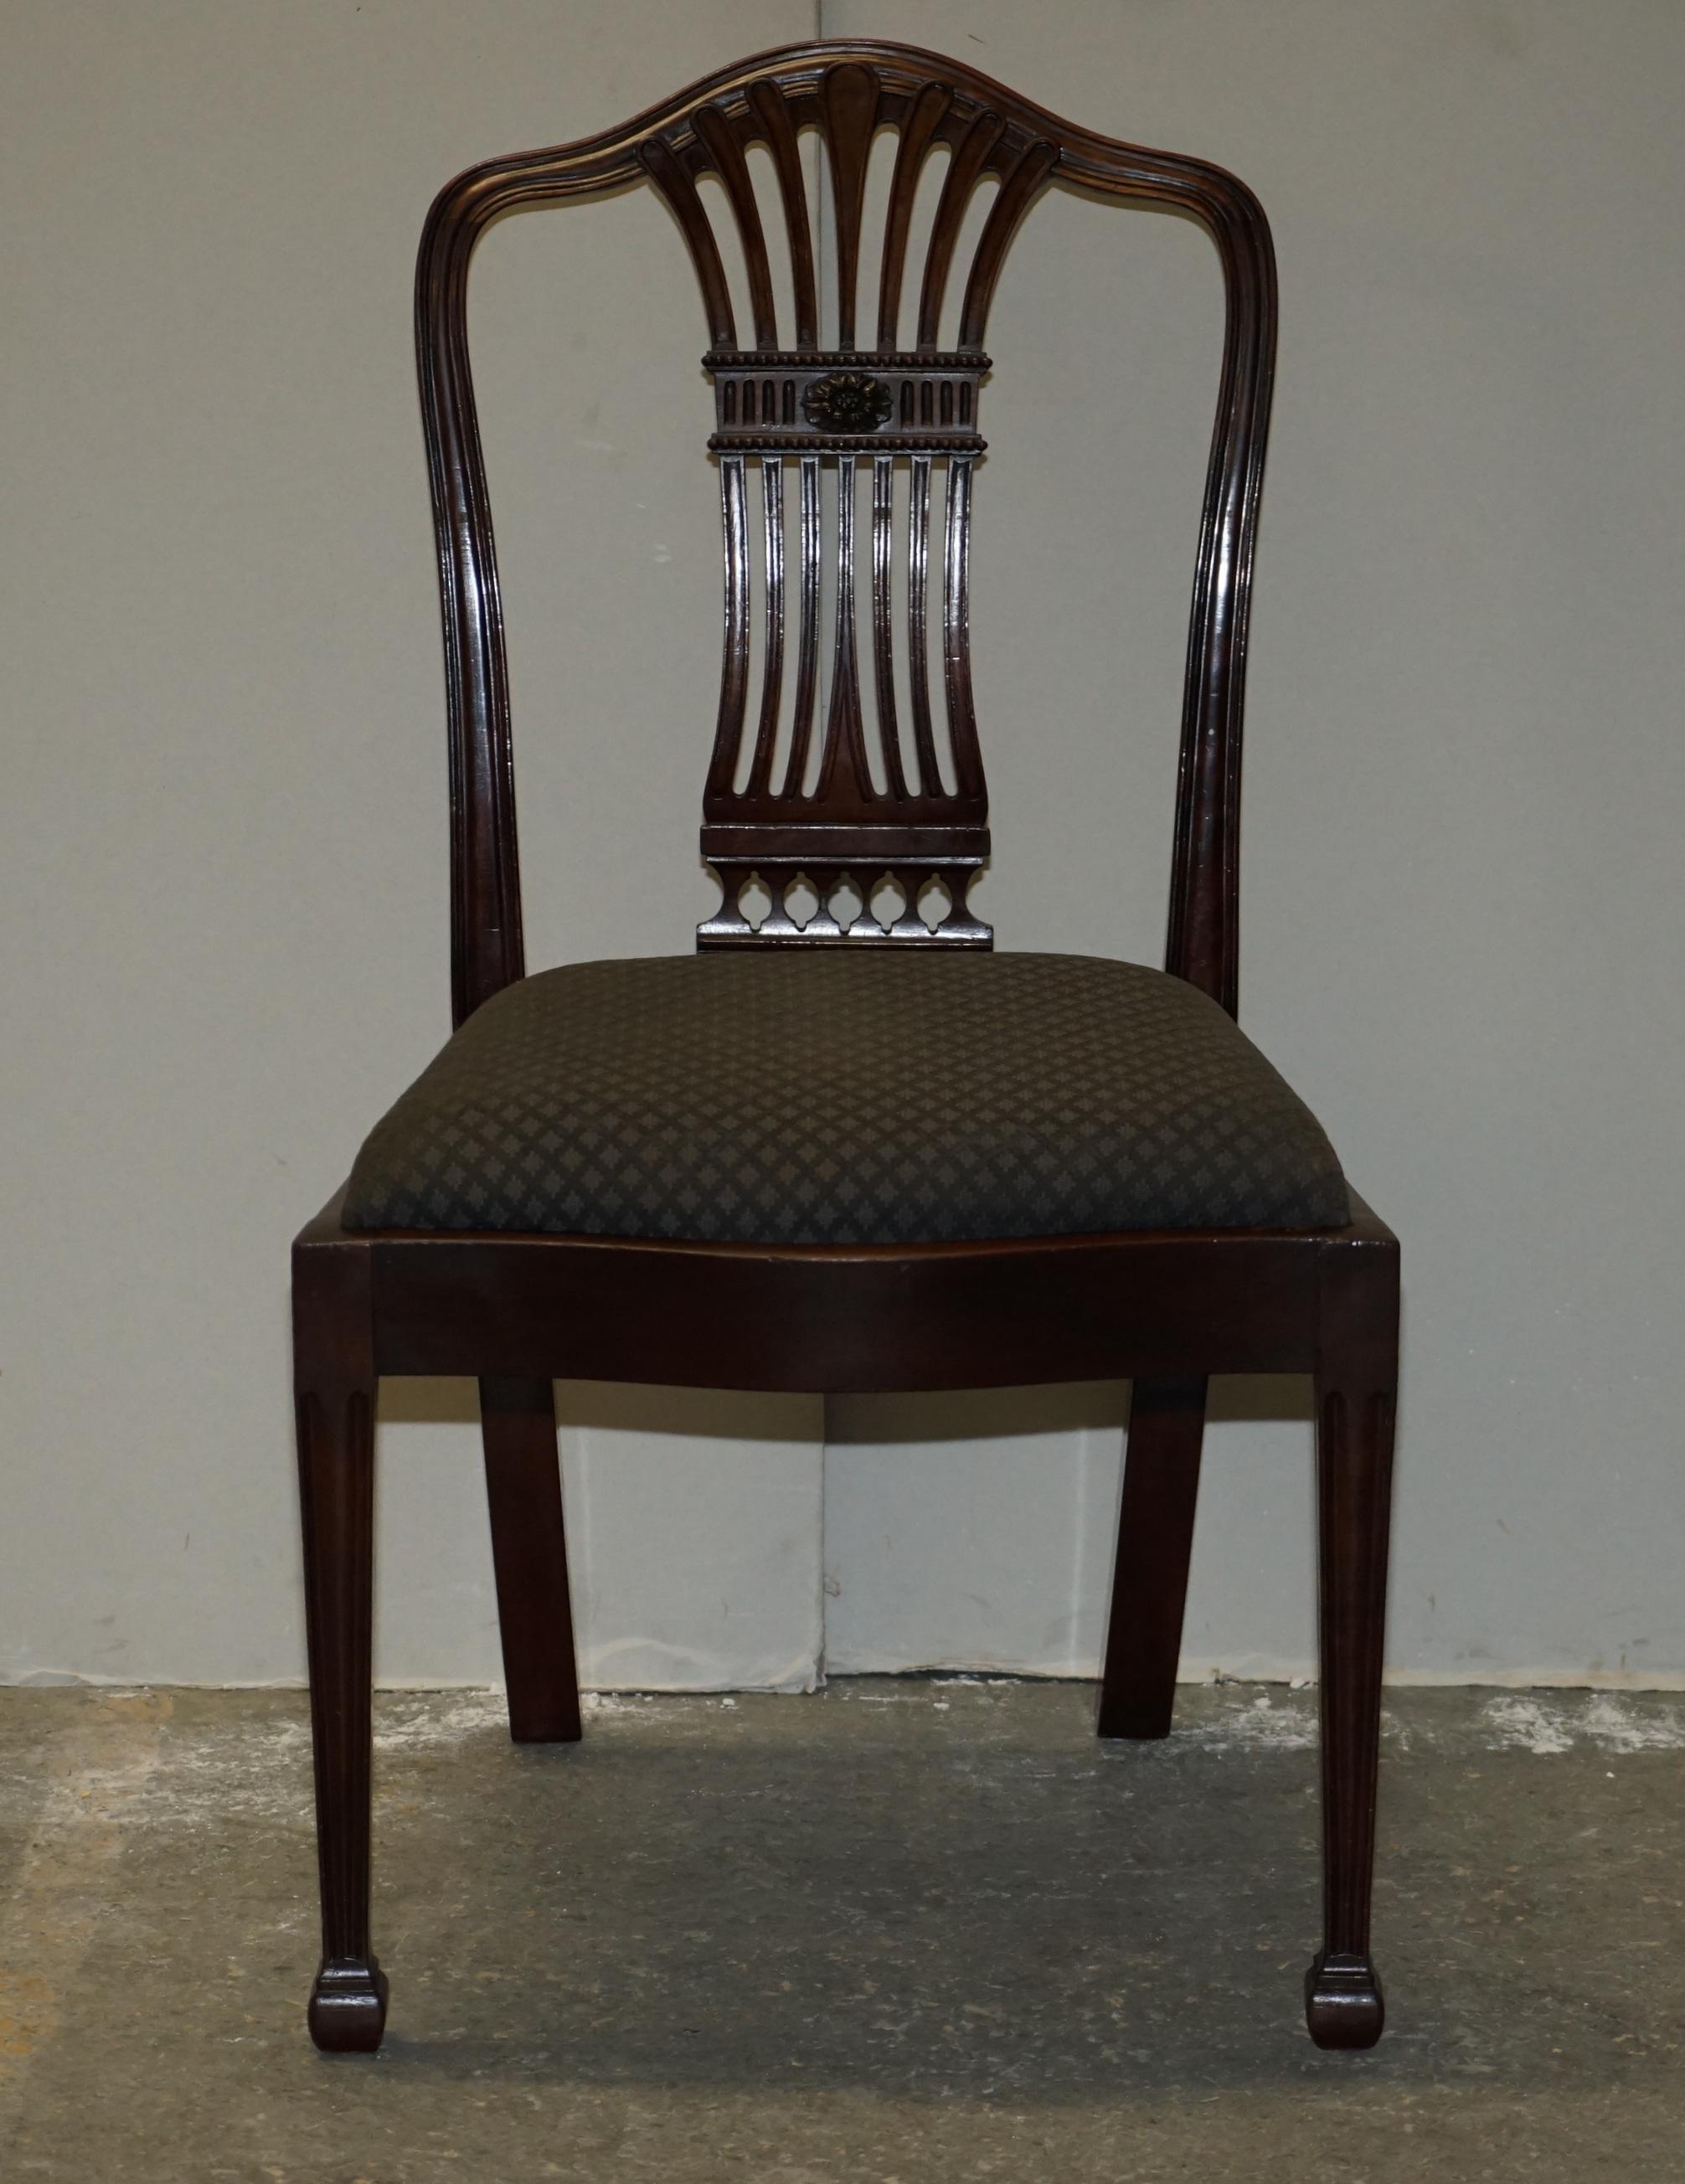 8 ANTIQUE GEORGE HEPPLEWHITE STYLE DINING CHAIRS FROM LADY DIANA'S SPENCER HOUSE im Angebot 11